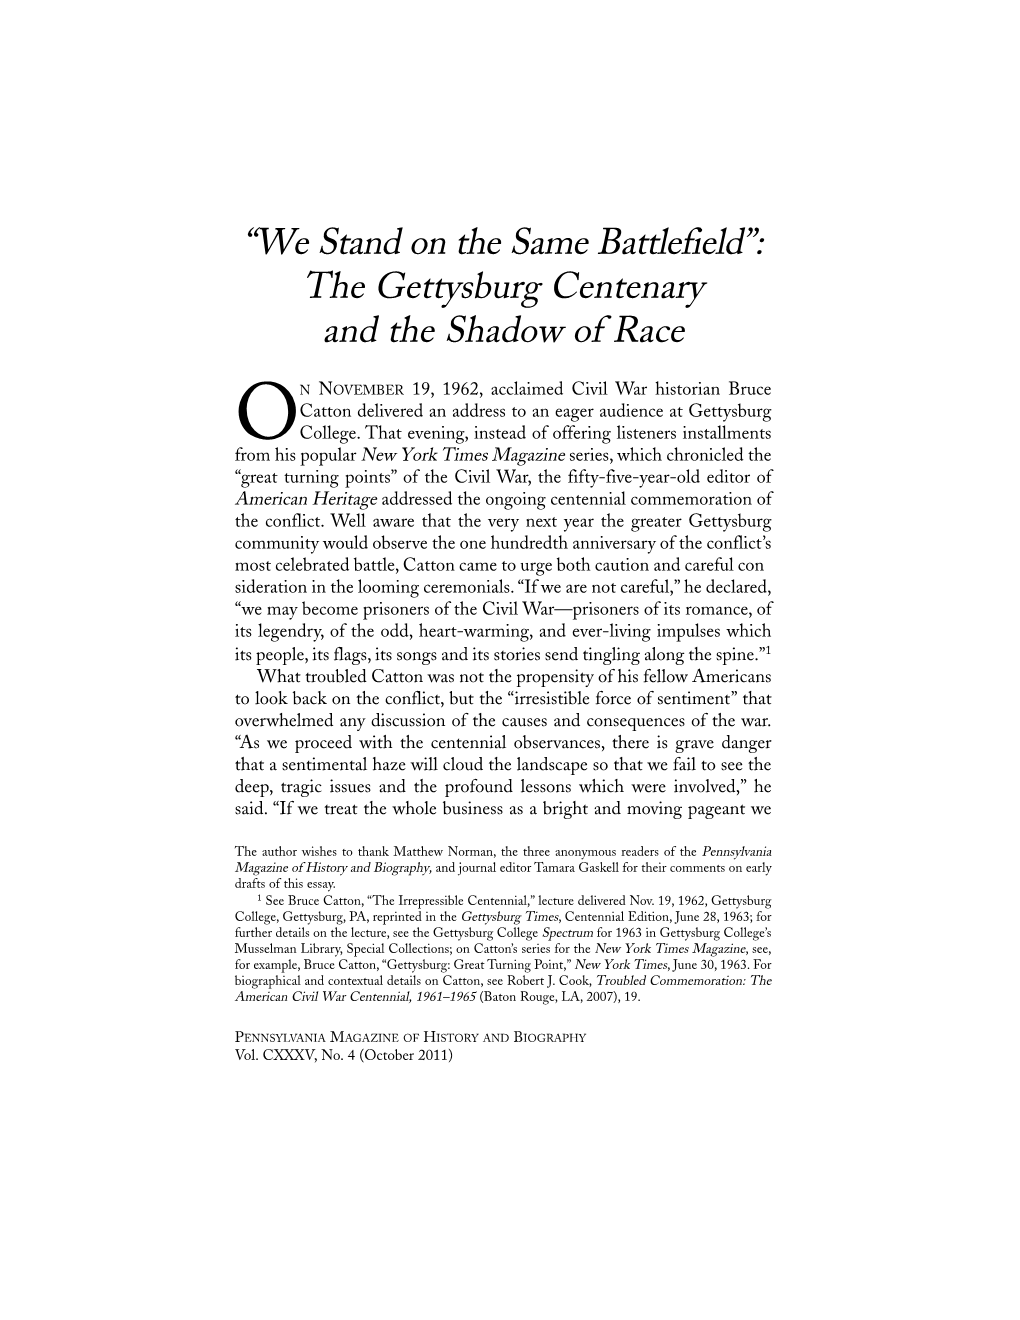 The Gettysburg Centenary and the Shadow of Race